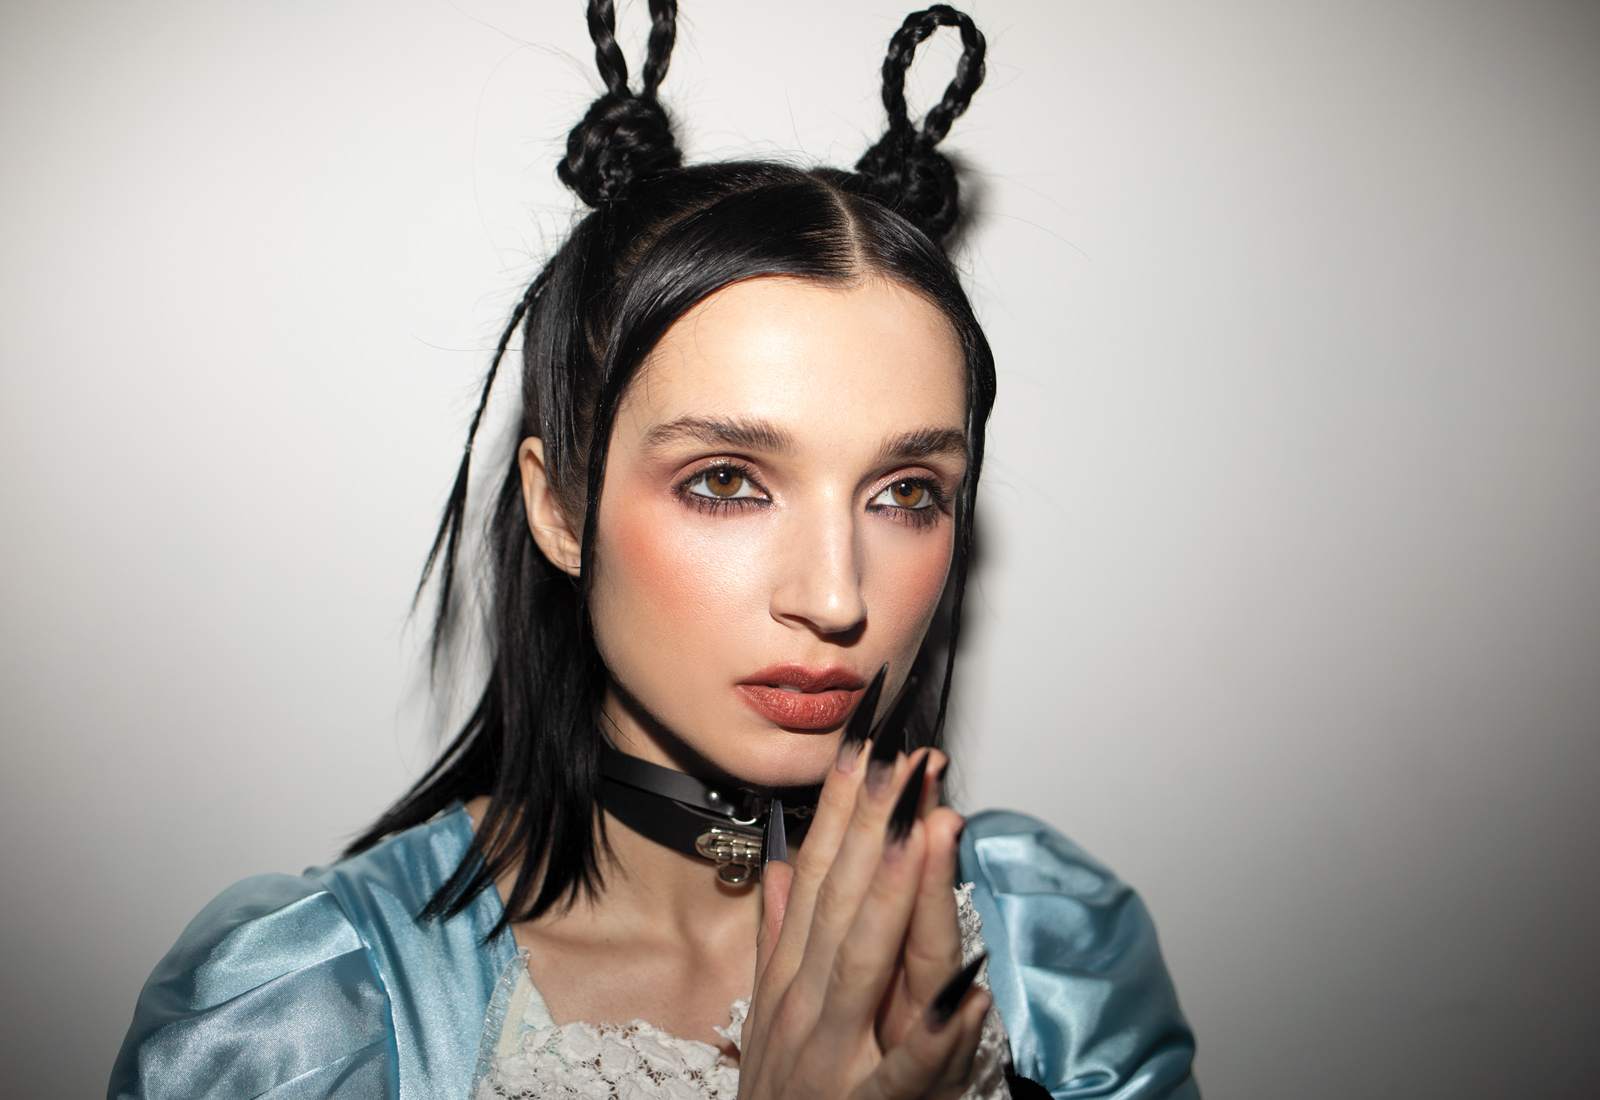 Poppy First Solo Female Metal Grammy Nominee Is Out to Smash More